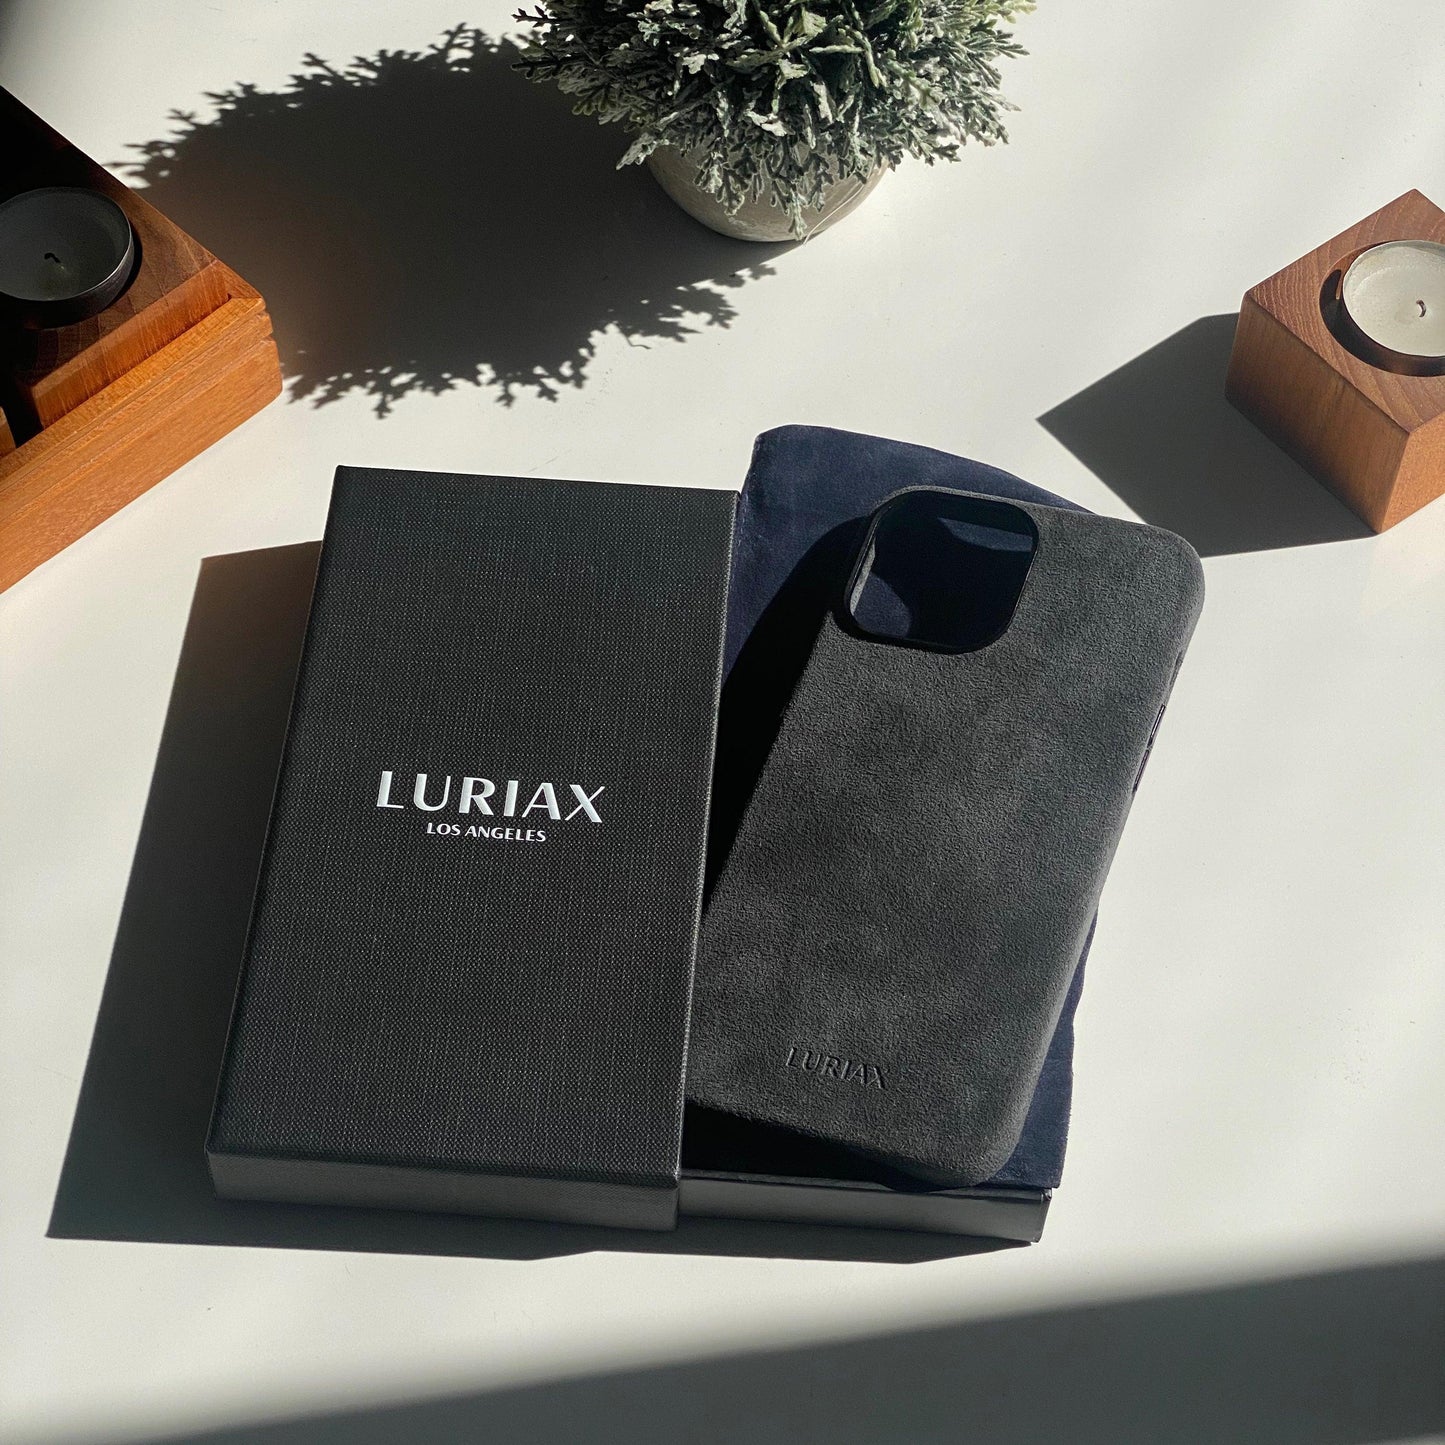 Alcantara Suede Leather iPhone Case and Accessories Collection - The iPhone 12 Series Case - Charcoal Black - Luriax